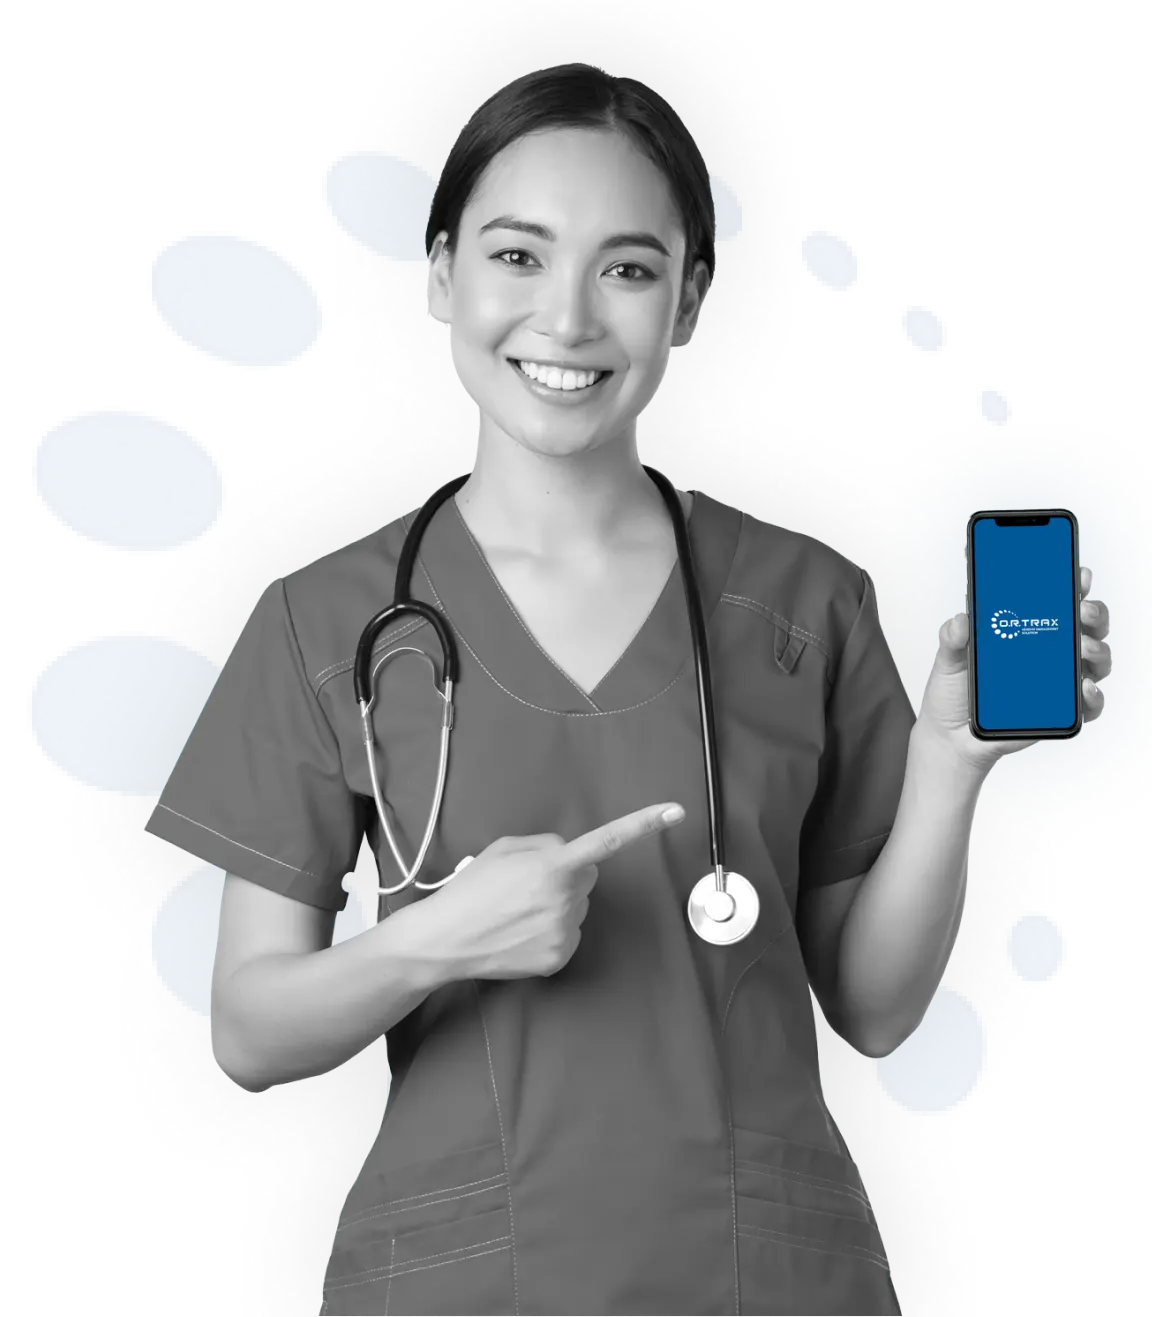 Smiling doctor with a mobile phone in her hand